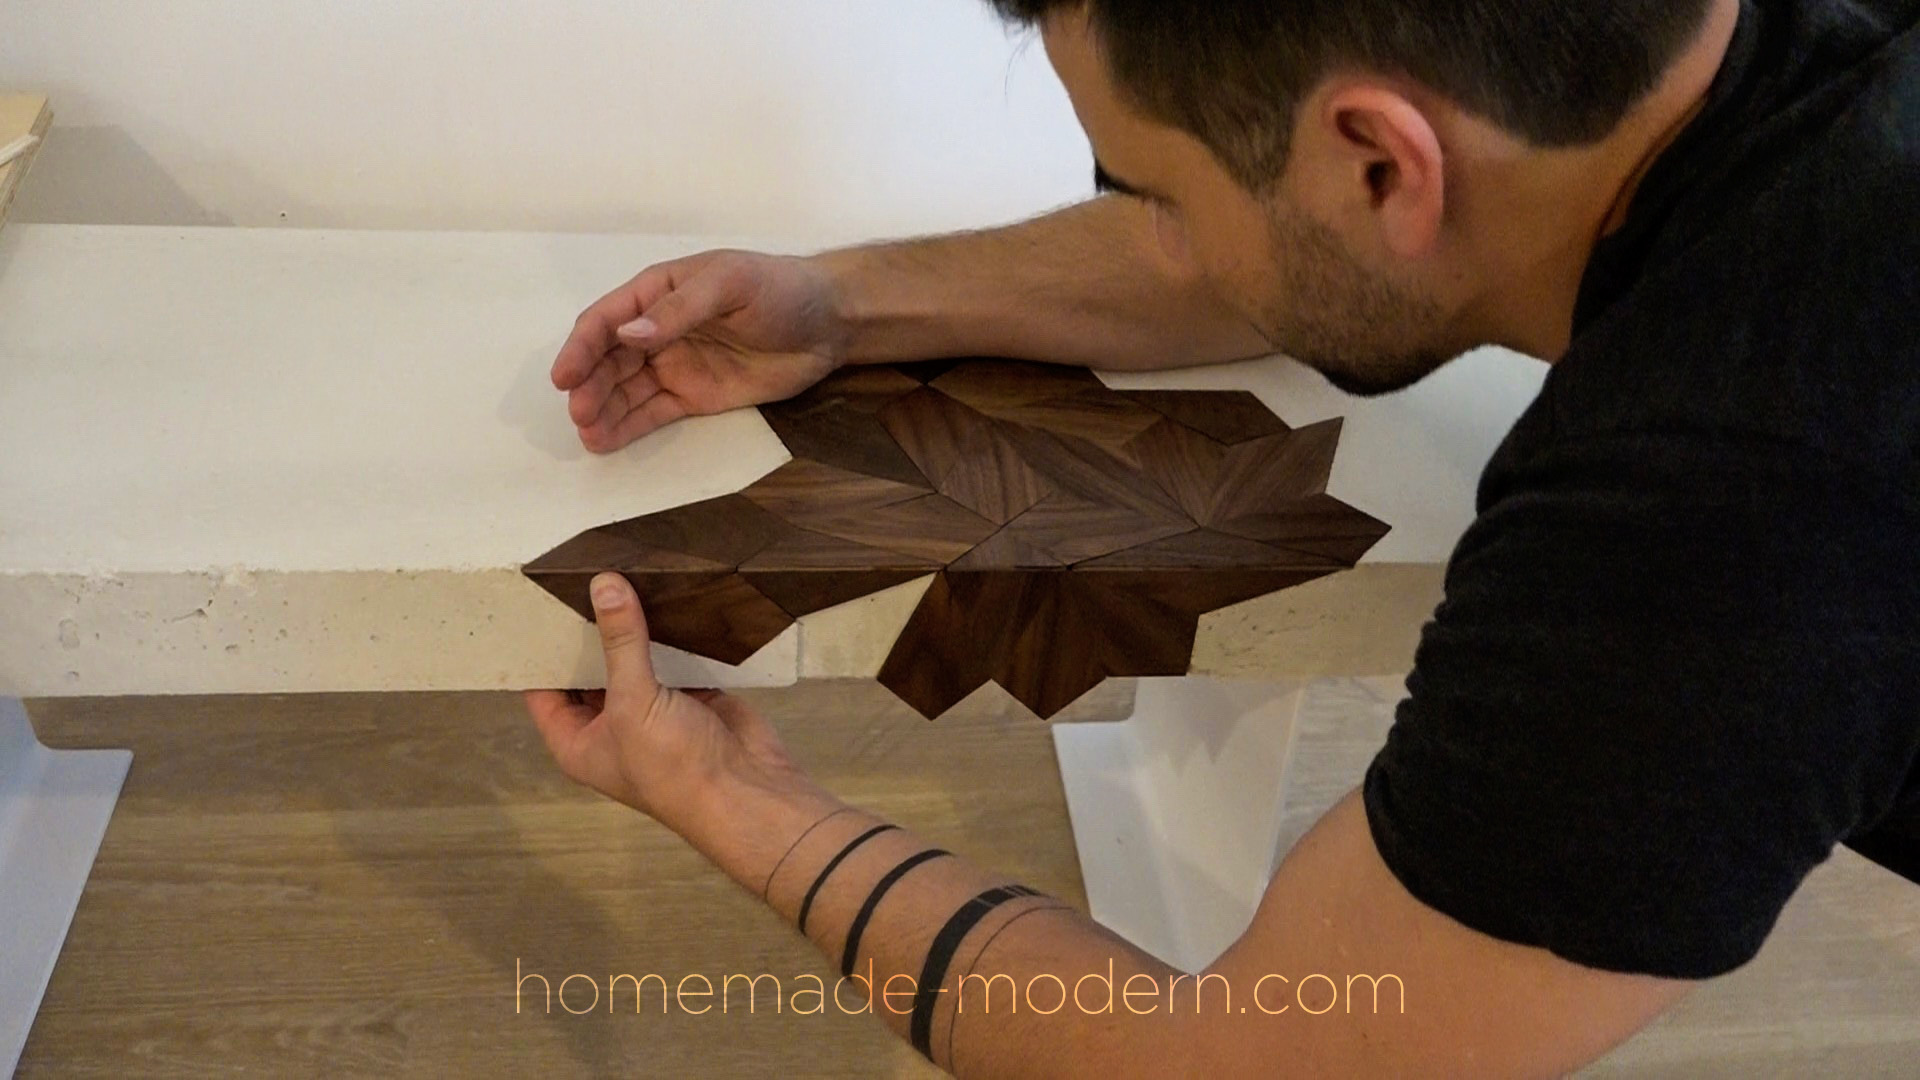 This white concrete table has a laser cut walnut inlay and was designed by Ben Uyeda. For more information go to HomeMade-Modern.com